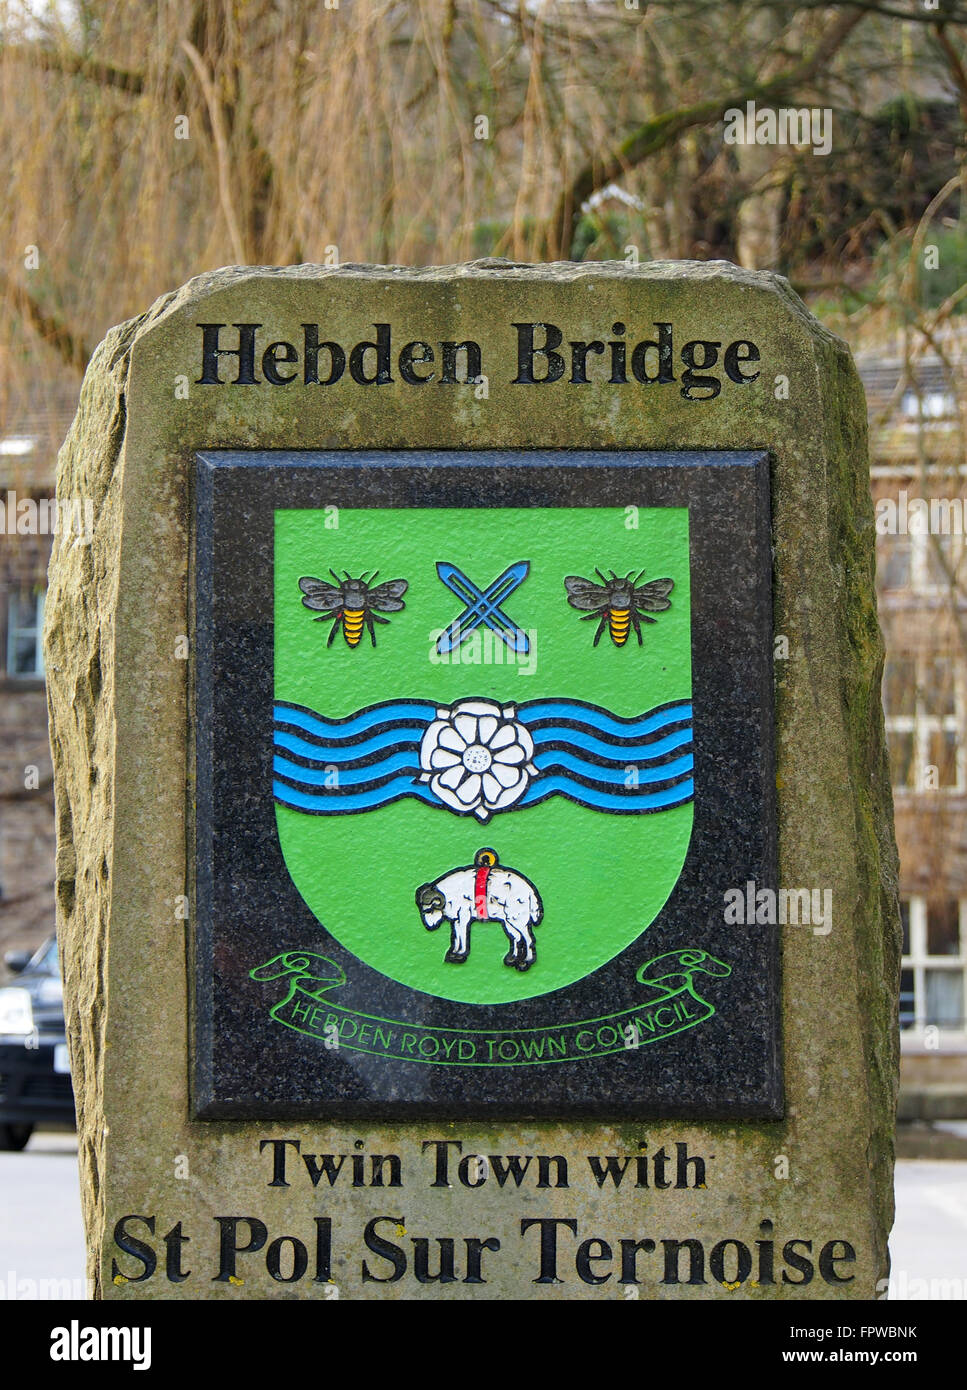 Sign at Hebden Bridge, Yorkshire, showing the town sign and that of St. Pol Sur Turnoise, in France, its twin town. Stock Photo